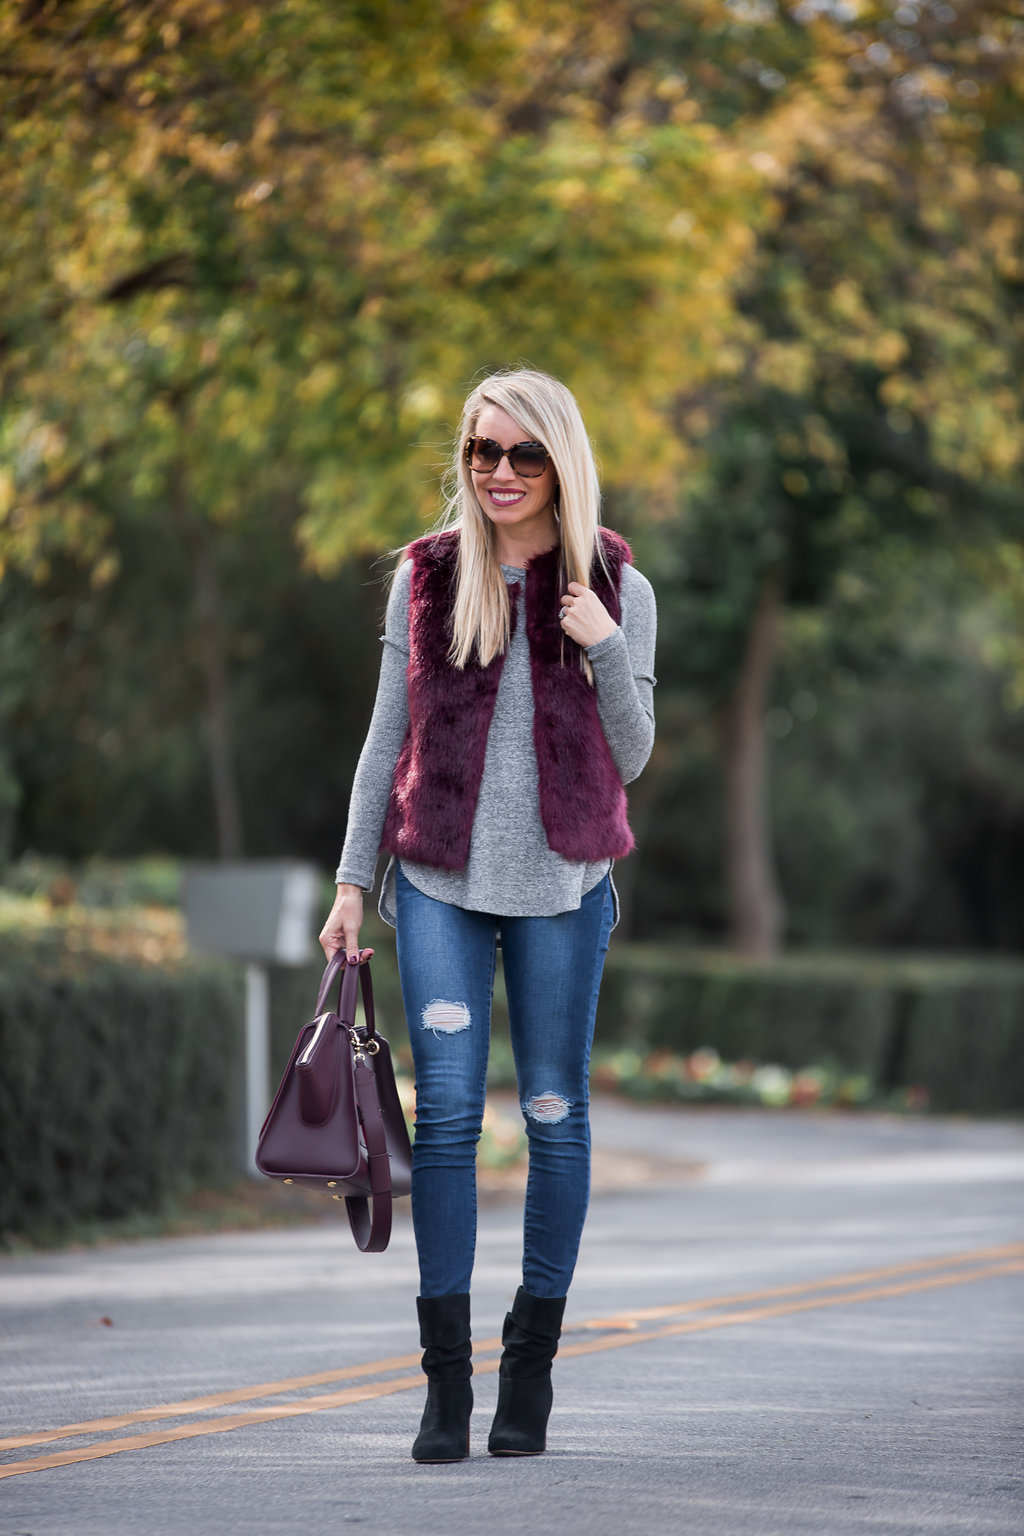 fall looks that will transition to winter by adding a few extra layers